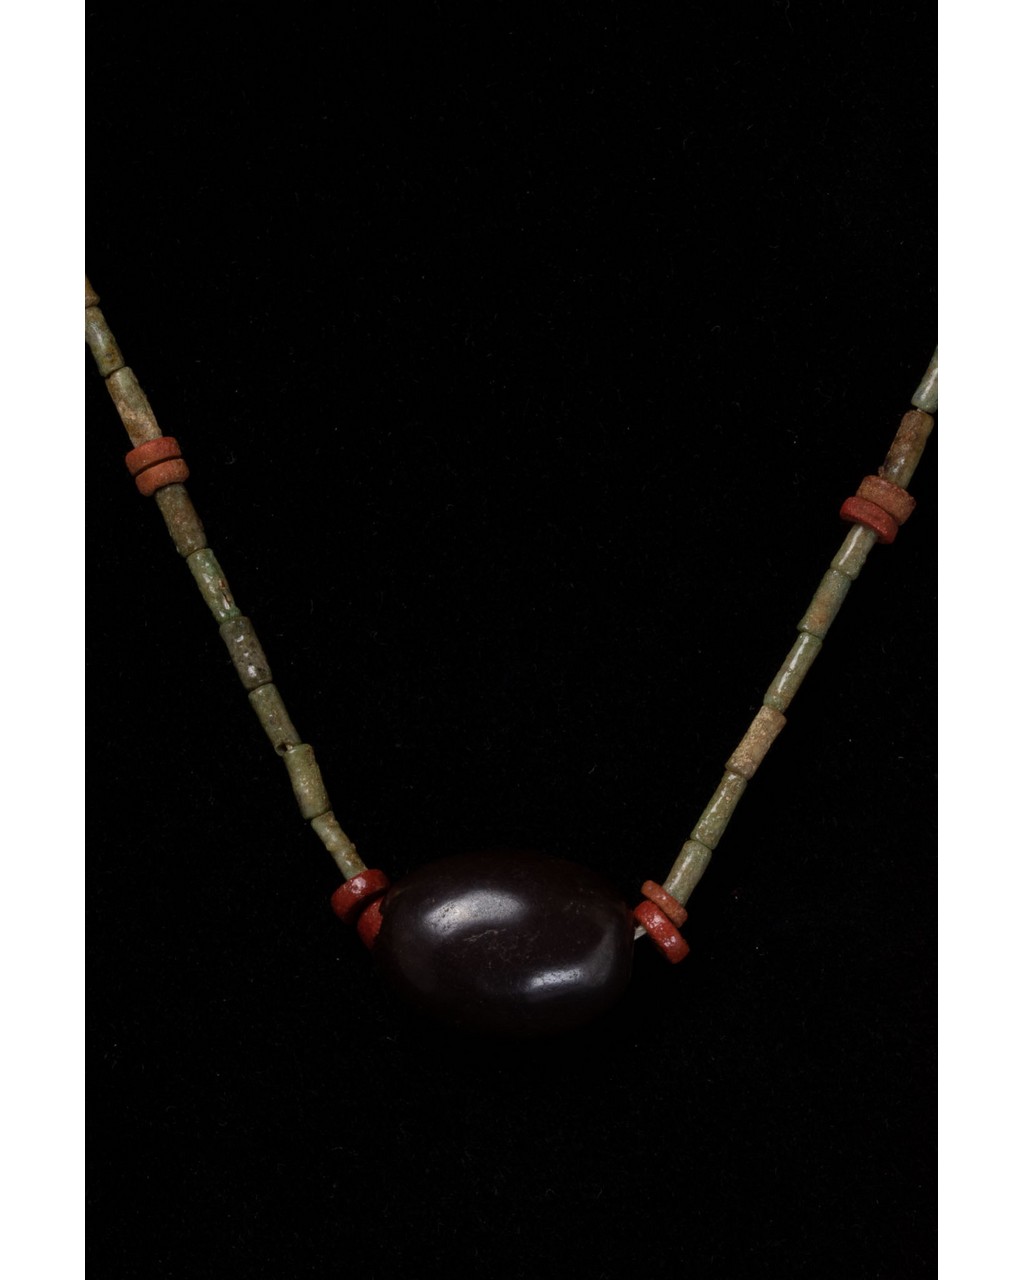 EGYPTIAN BEADED NECKLACE WITH AMULET - Image 6 of 7